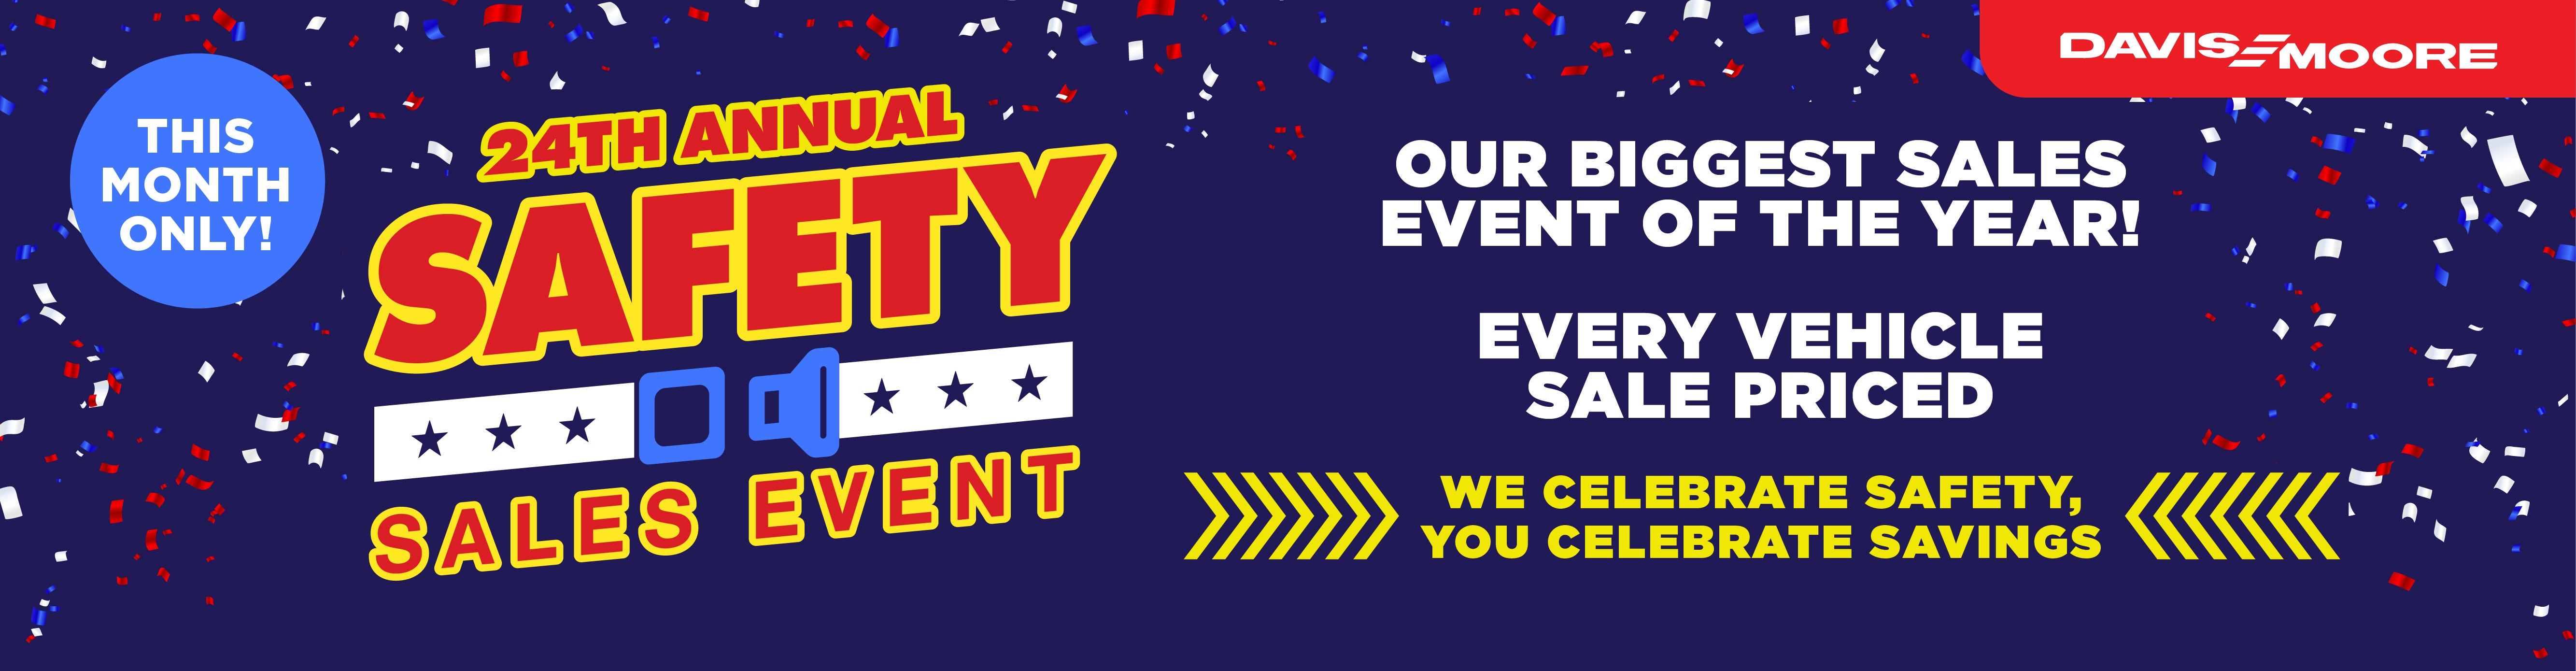 24TH ANNUAL SAFETY SALES EVENT